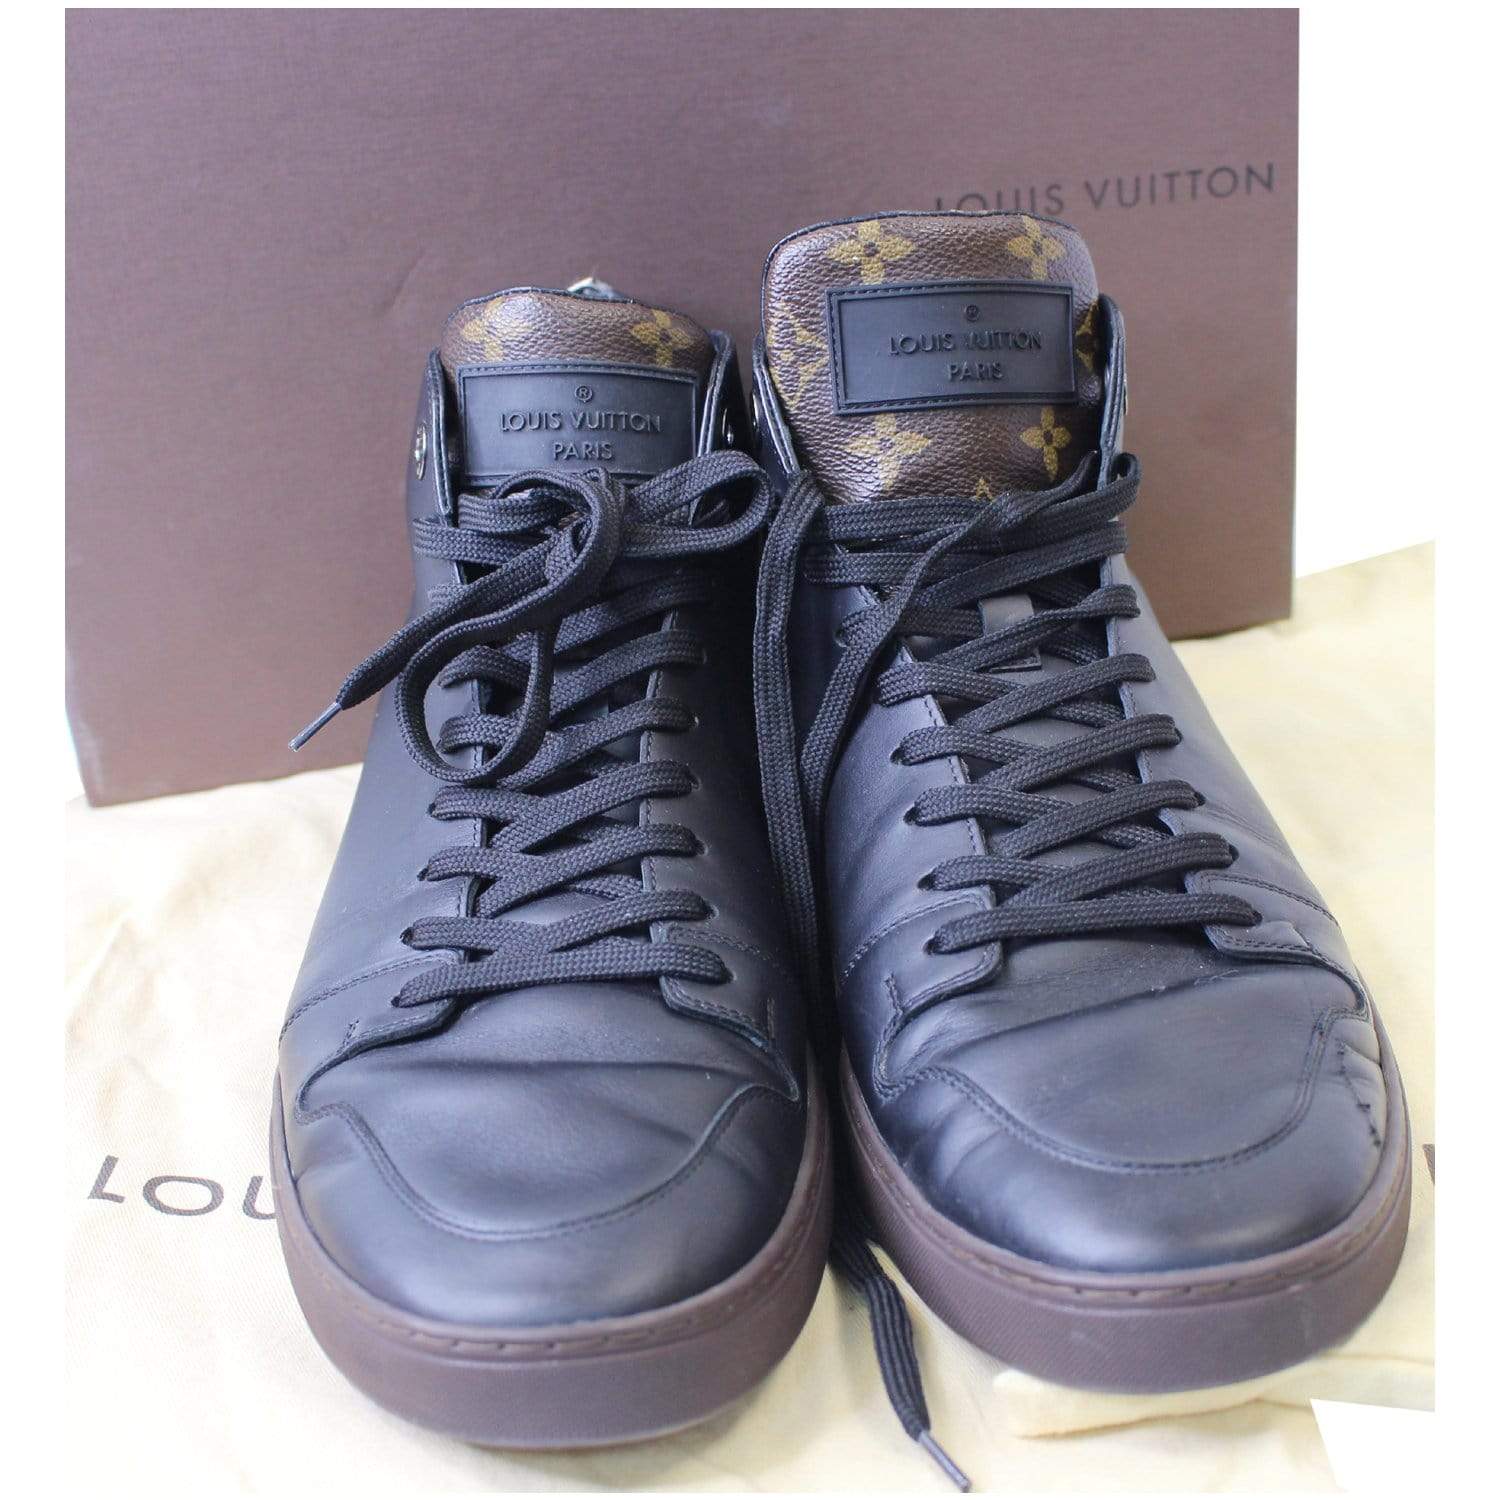 Louis Vuitton High Top Sneakers Shoes